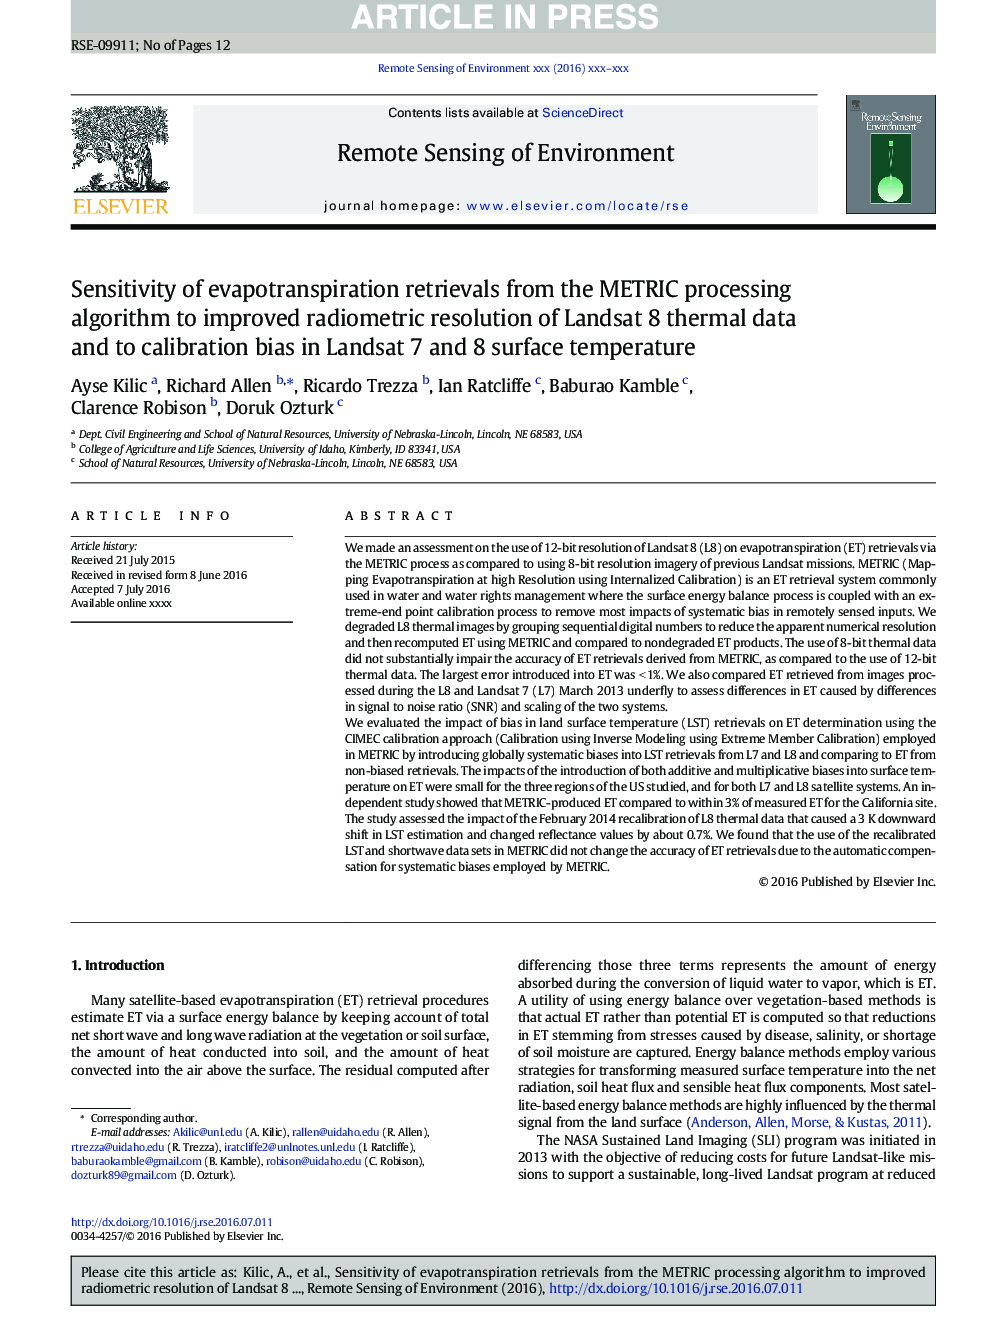 Sensitivity of evapotranspiration retrievals from the METRIC processing algorithm to improved radiometric resolution of Landsat 8 thermal data and to calibration bias in Landsat 7 and 8 surface temperature